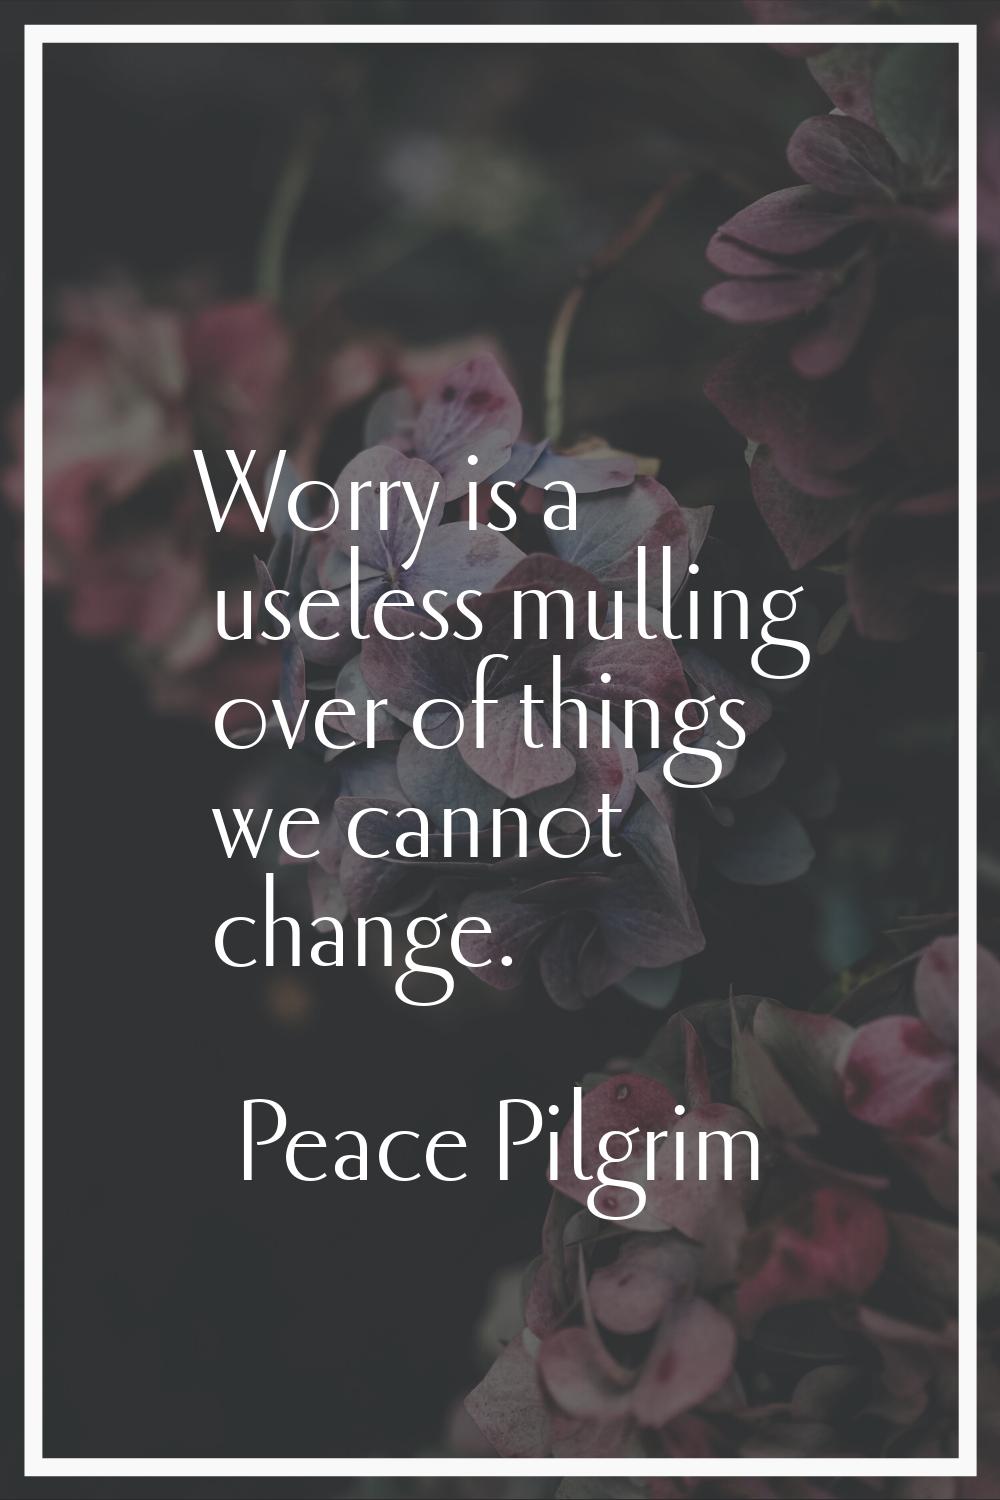 Worry is a useless mulling over of things we cannot change.